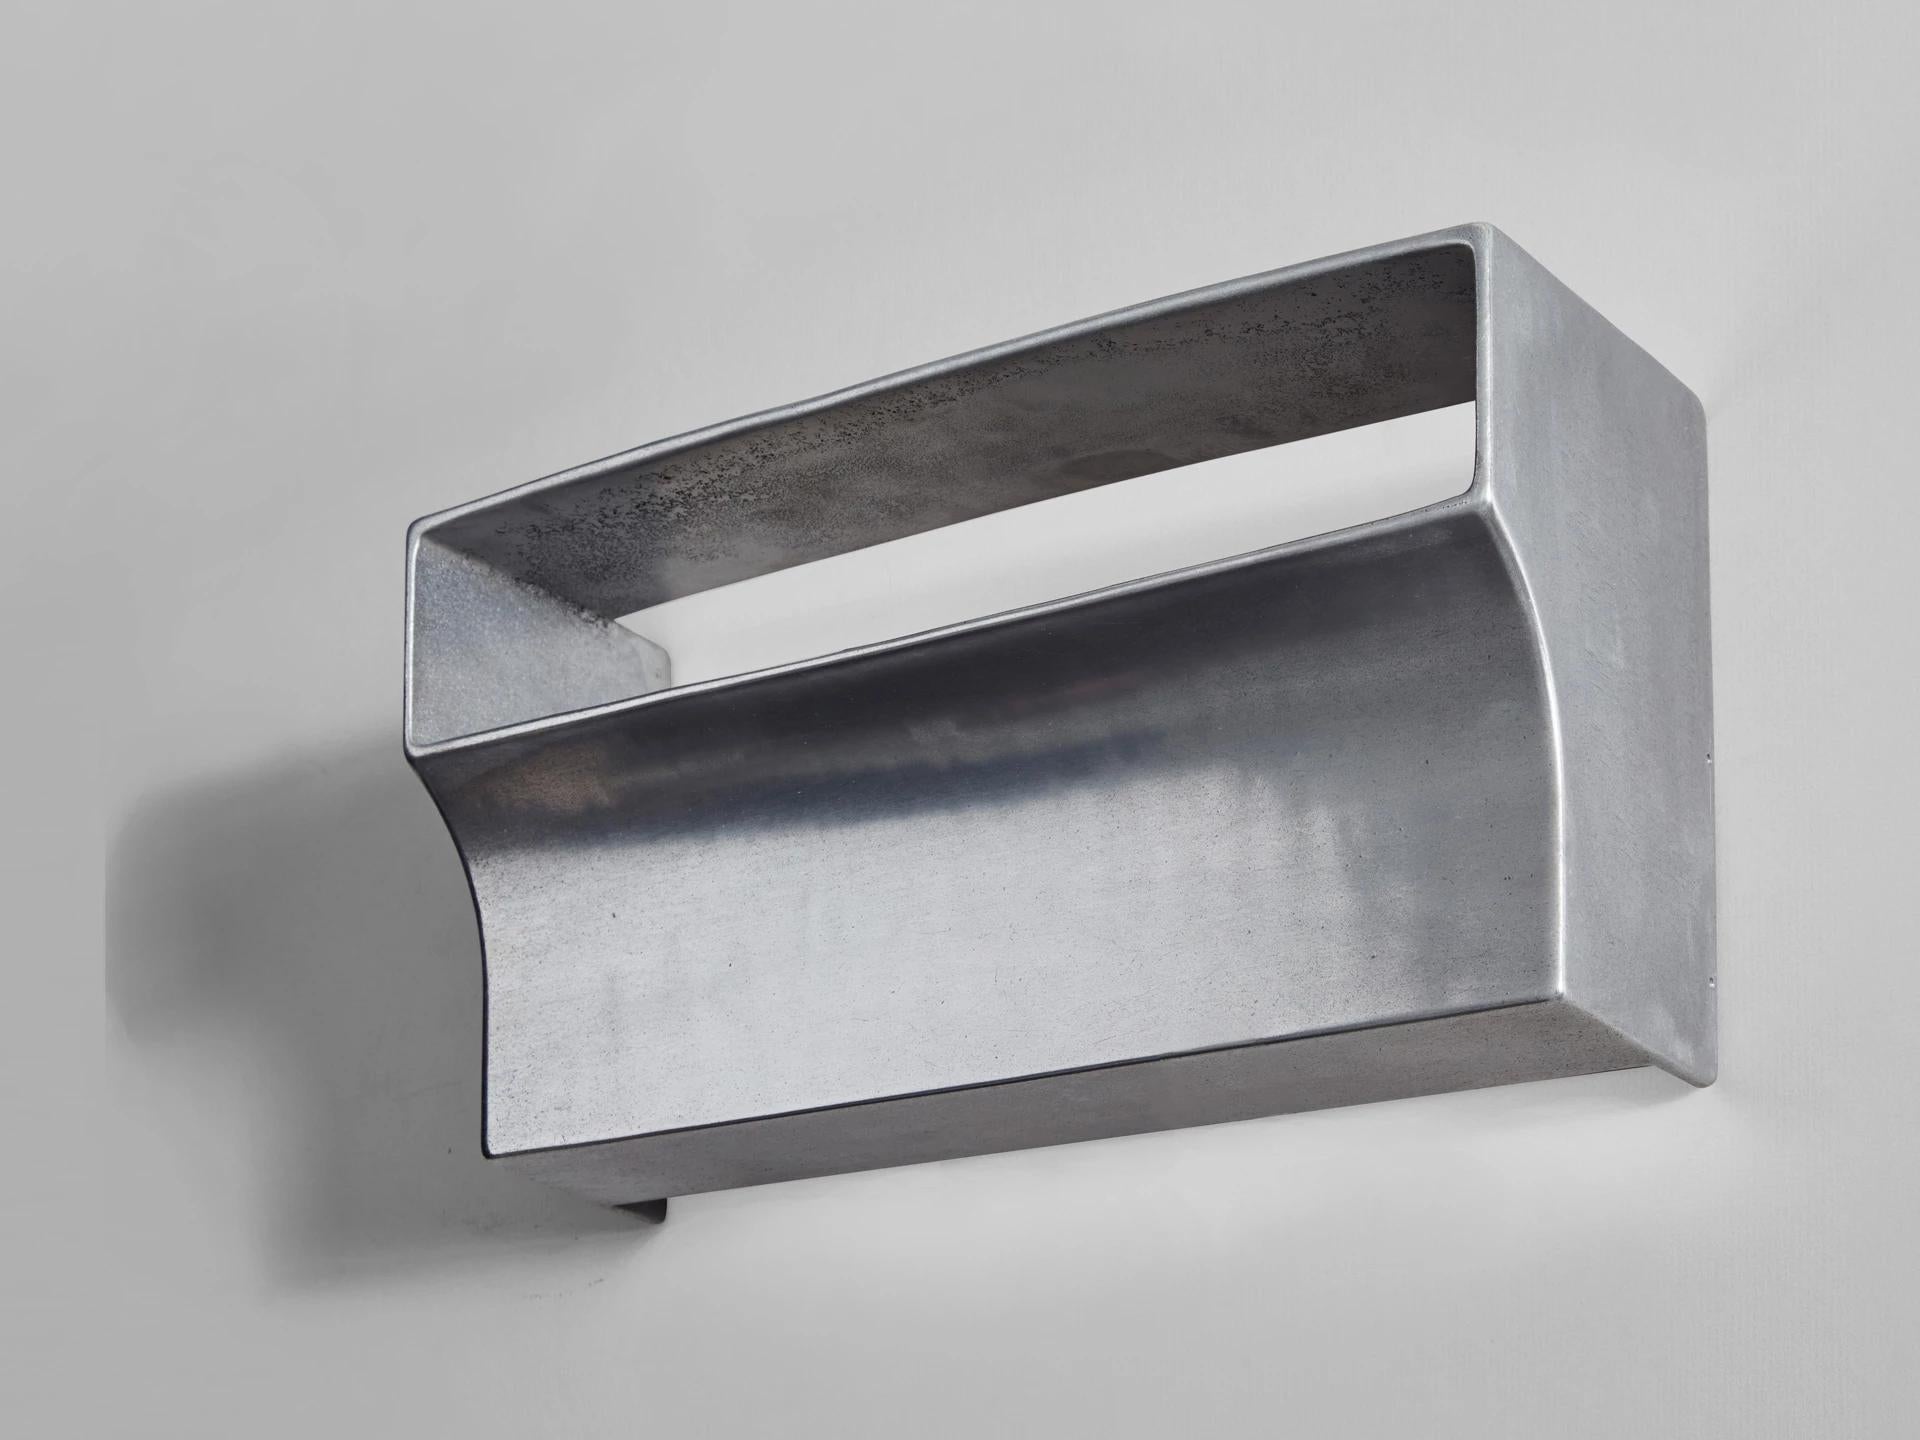 Scoop aluminium wall light by Henry Wilson
Scoop wall light is sand cast in aluminium. Openings on the top and bottom of the sconce allow light to wash up and down the walls, while the slot at the front projects light outwards while hiding the bulbs